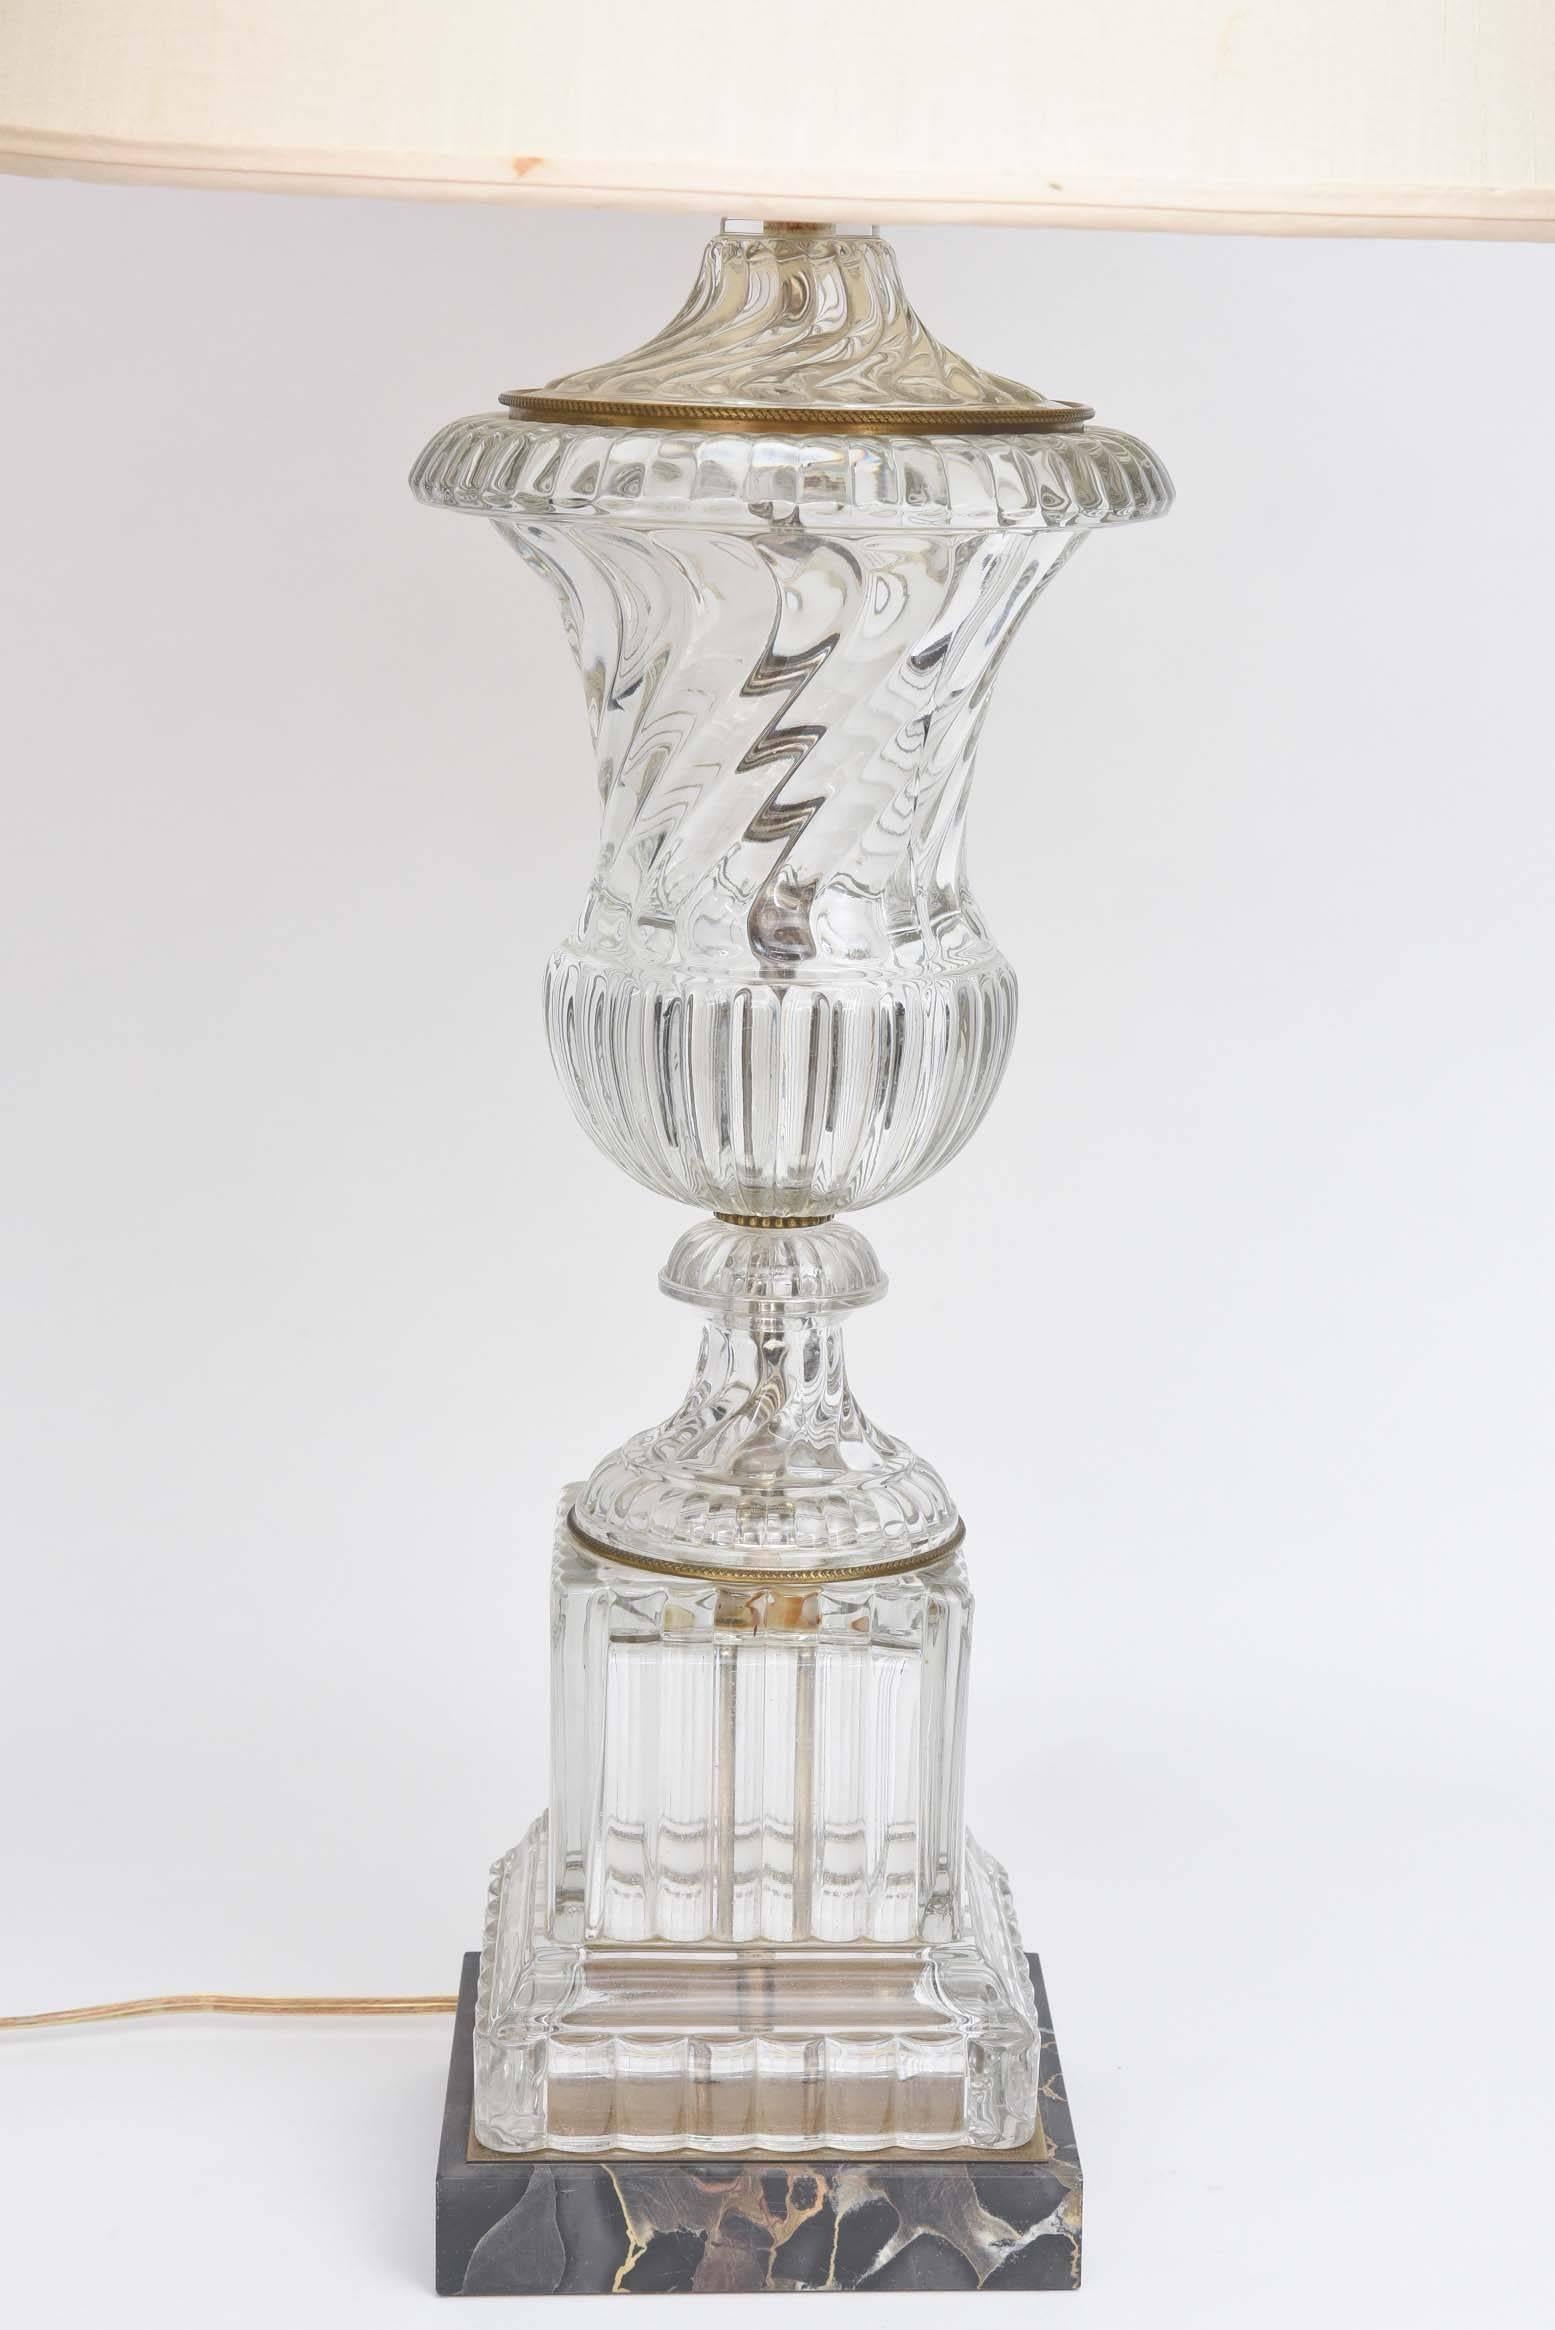 A semi antique crystal lamp that we attribute to Baccarat in fine working condition. Nice details to the gilt metal mounts and decorative details and Classic finial. The crystal is in wonderful condition and the ormolu mounts have wonderful patina.